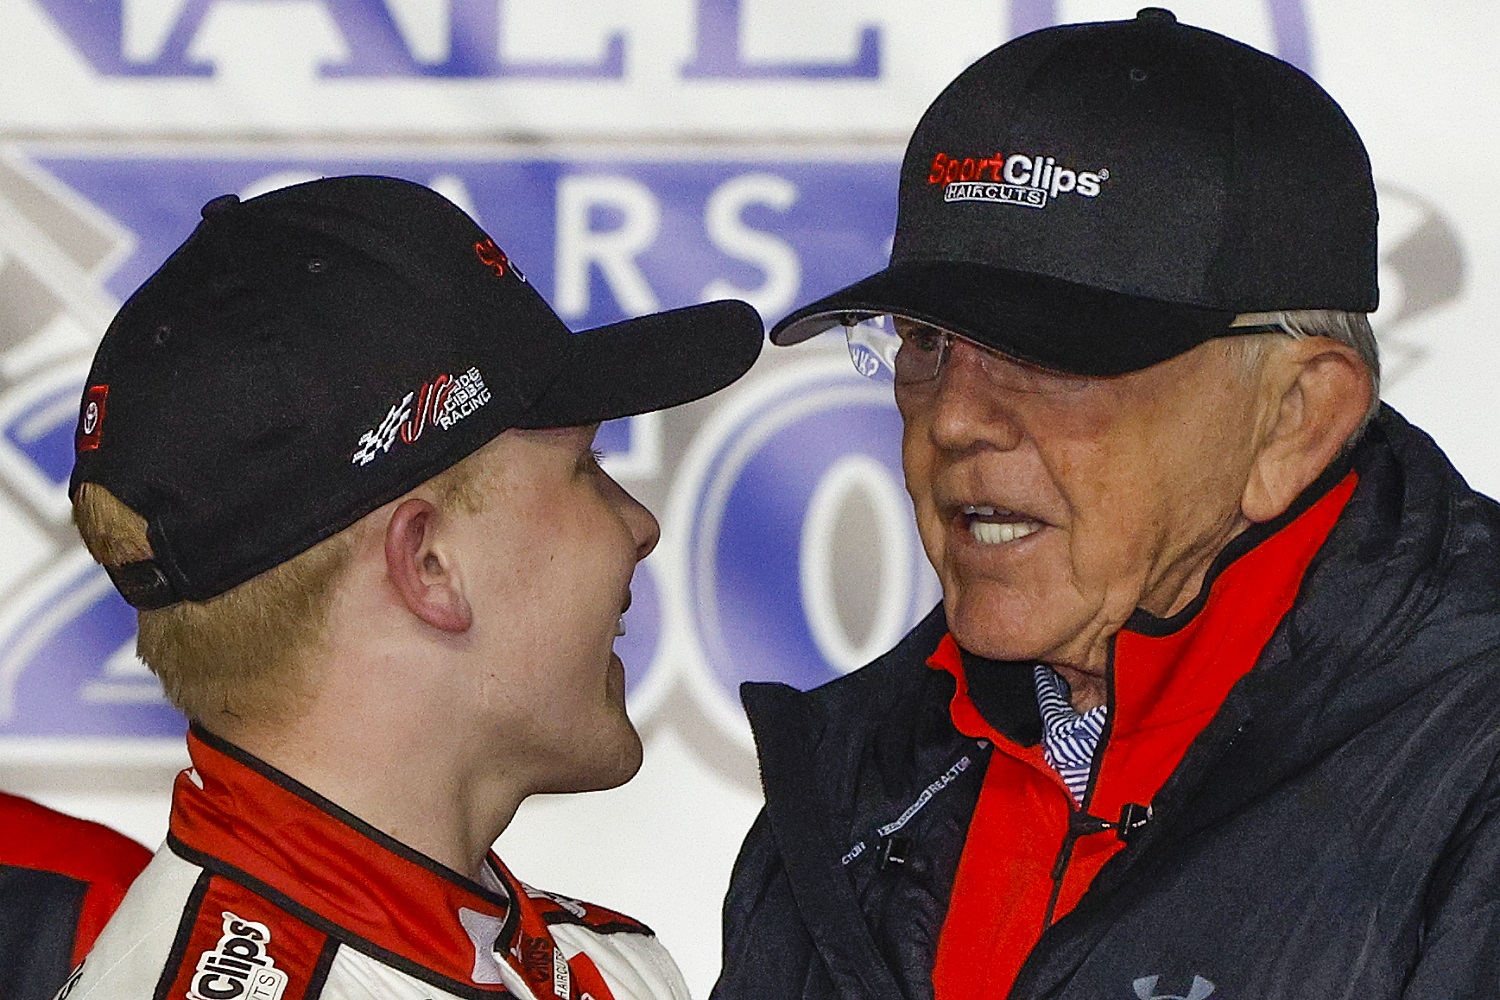 Ty Gibbs is congratulated by his grandfather and team owner Joe Gibbs in after winning the NASCAR Xfinity Series Nalley Cars 250 at Atlanta Motor Speedway on March 19, 2022. | Sean Gardner/Getty Images